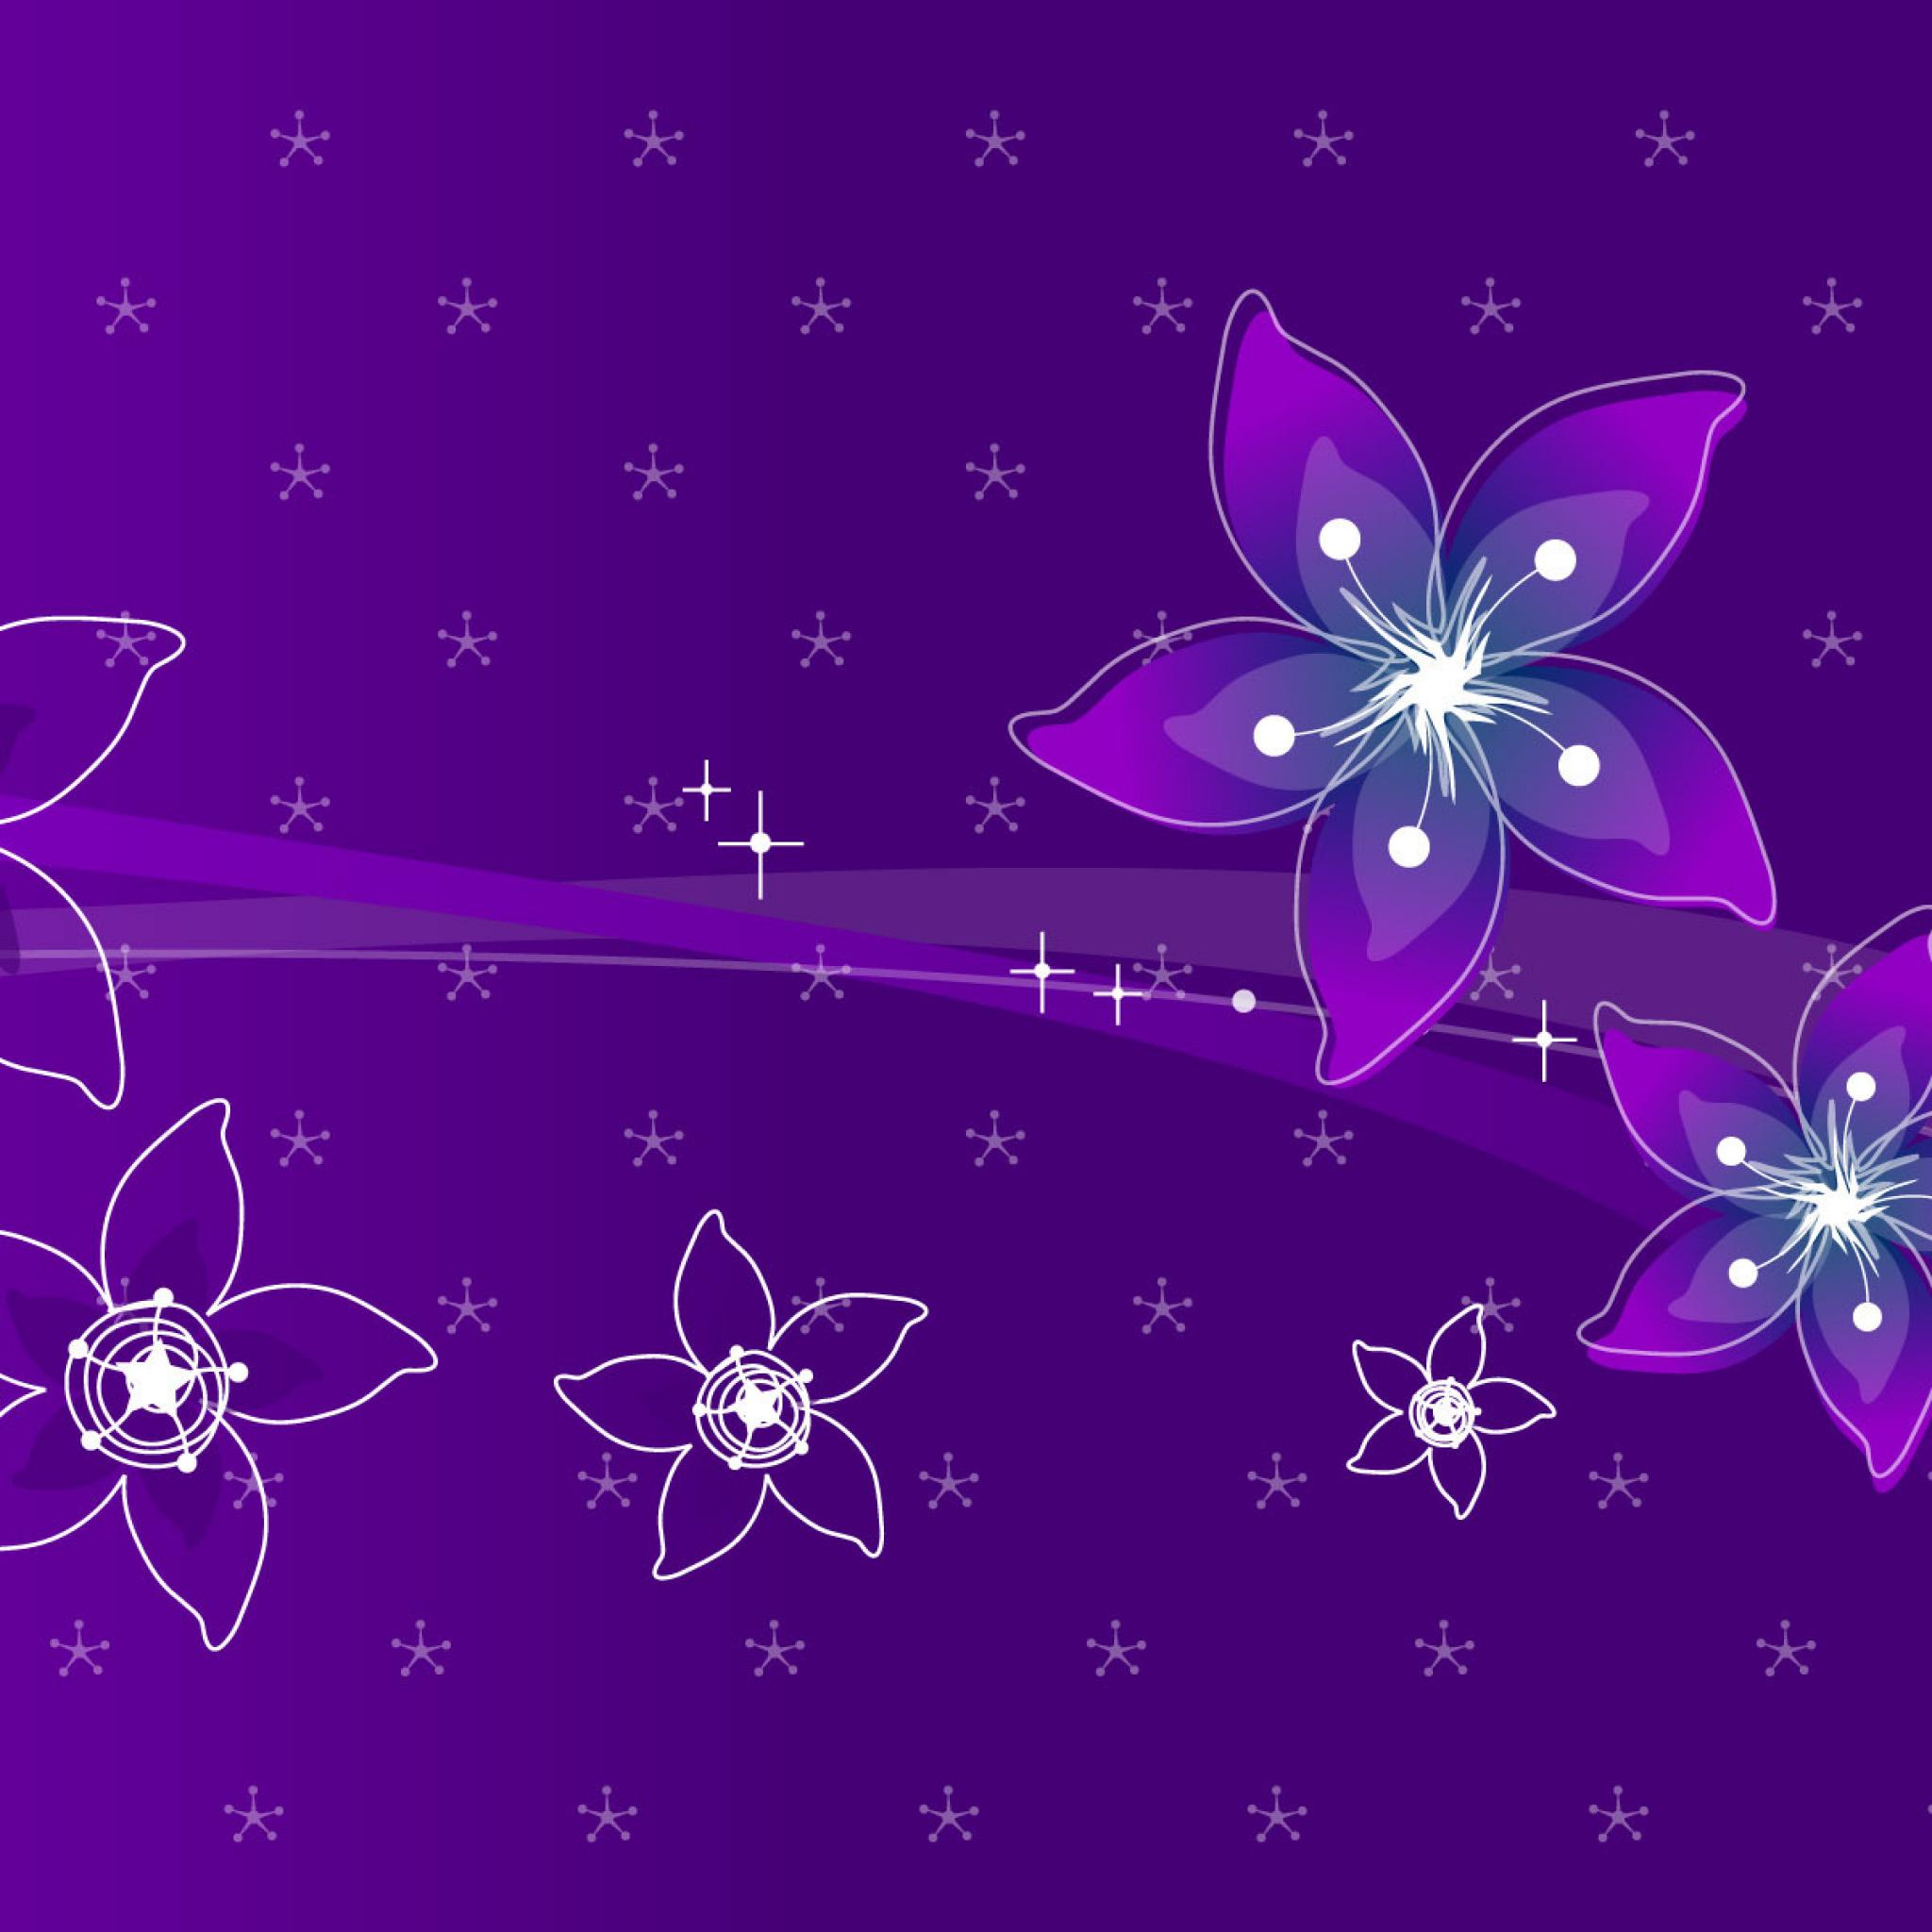 Wallpaper Abstaktsiya Flowers And Purple Lines Hq Wallpapers For Pc Ipad タブレット壁紙ギャラリー